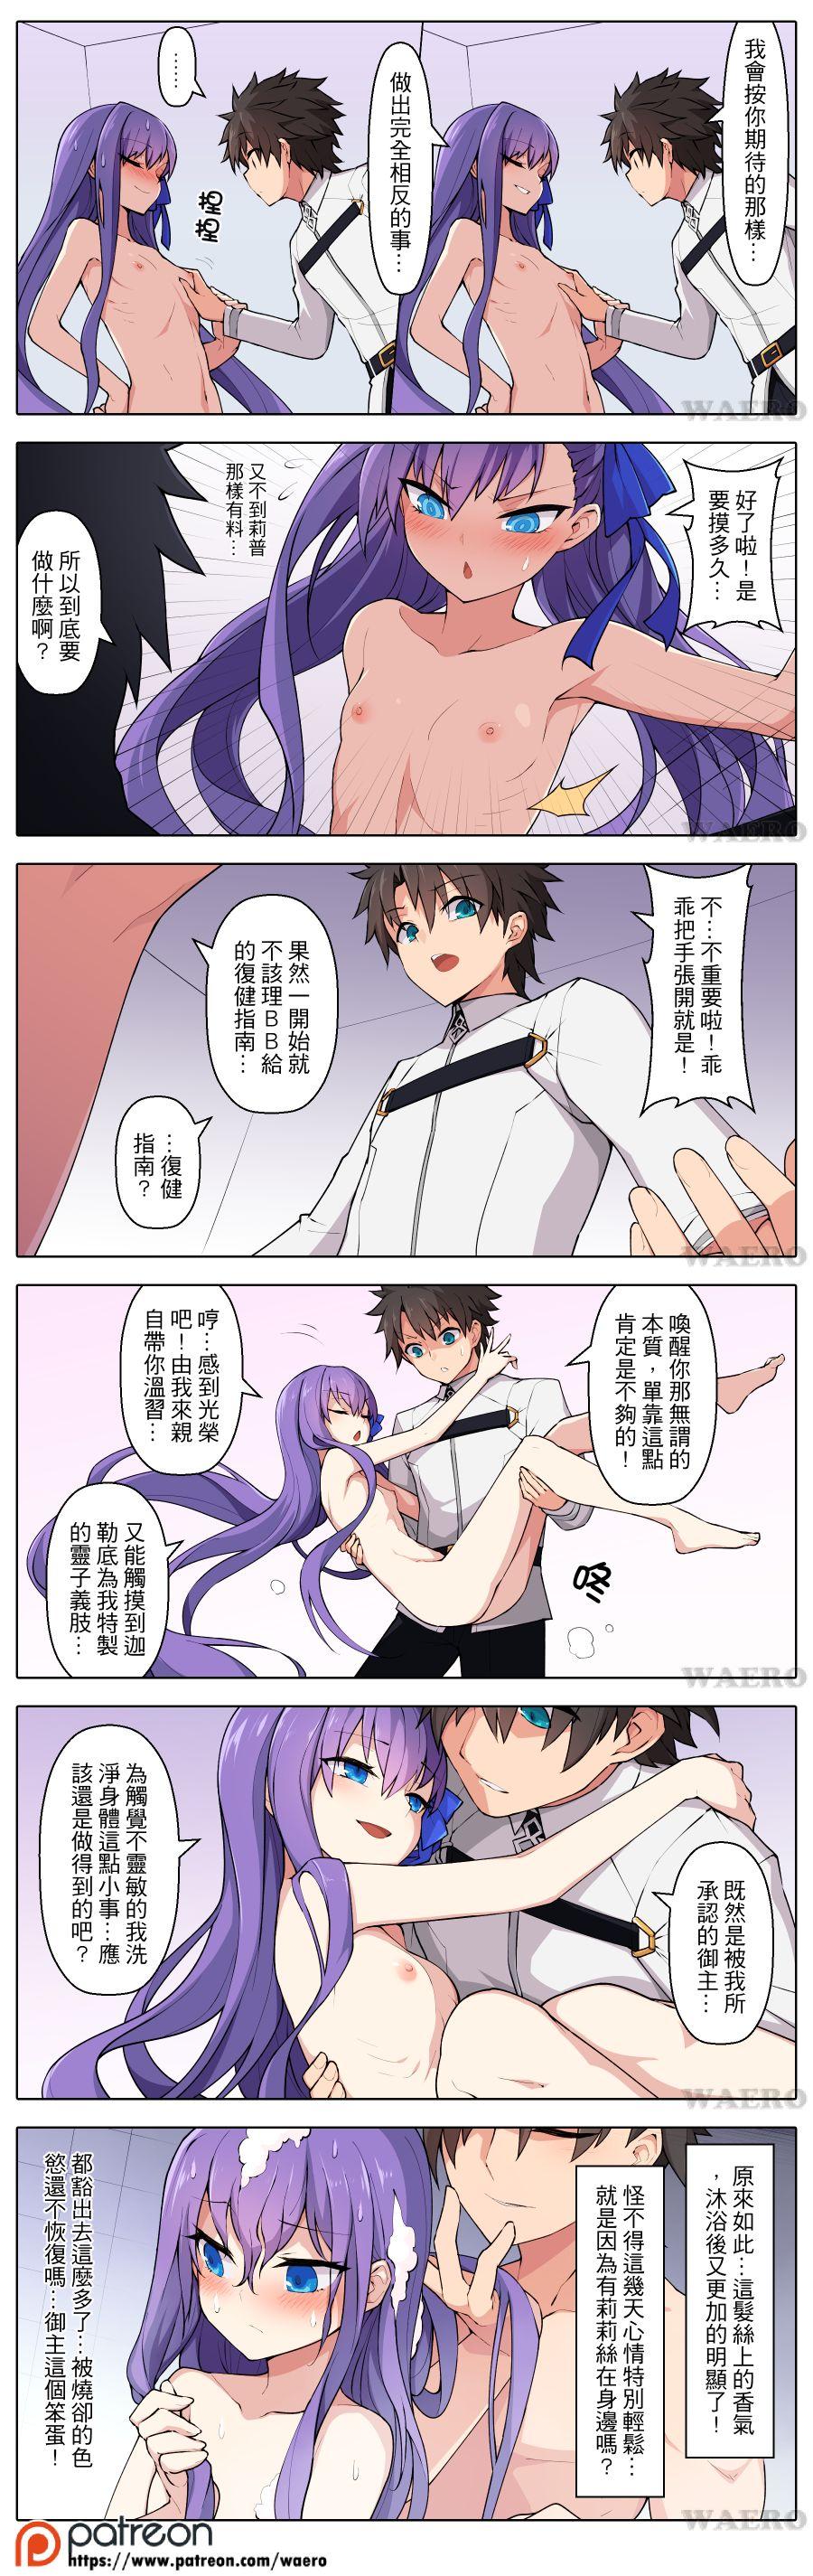 Anus Lust Grand Order - Fate grand order Amature Porn - Page 2